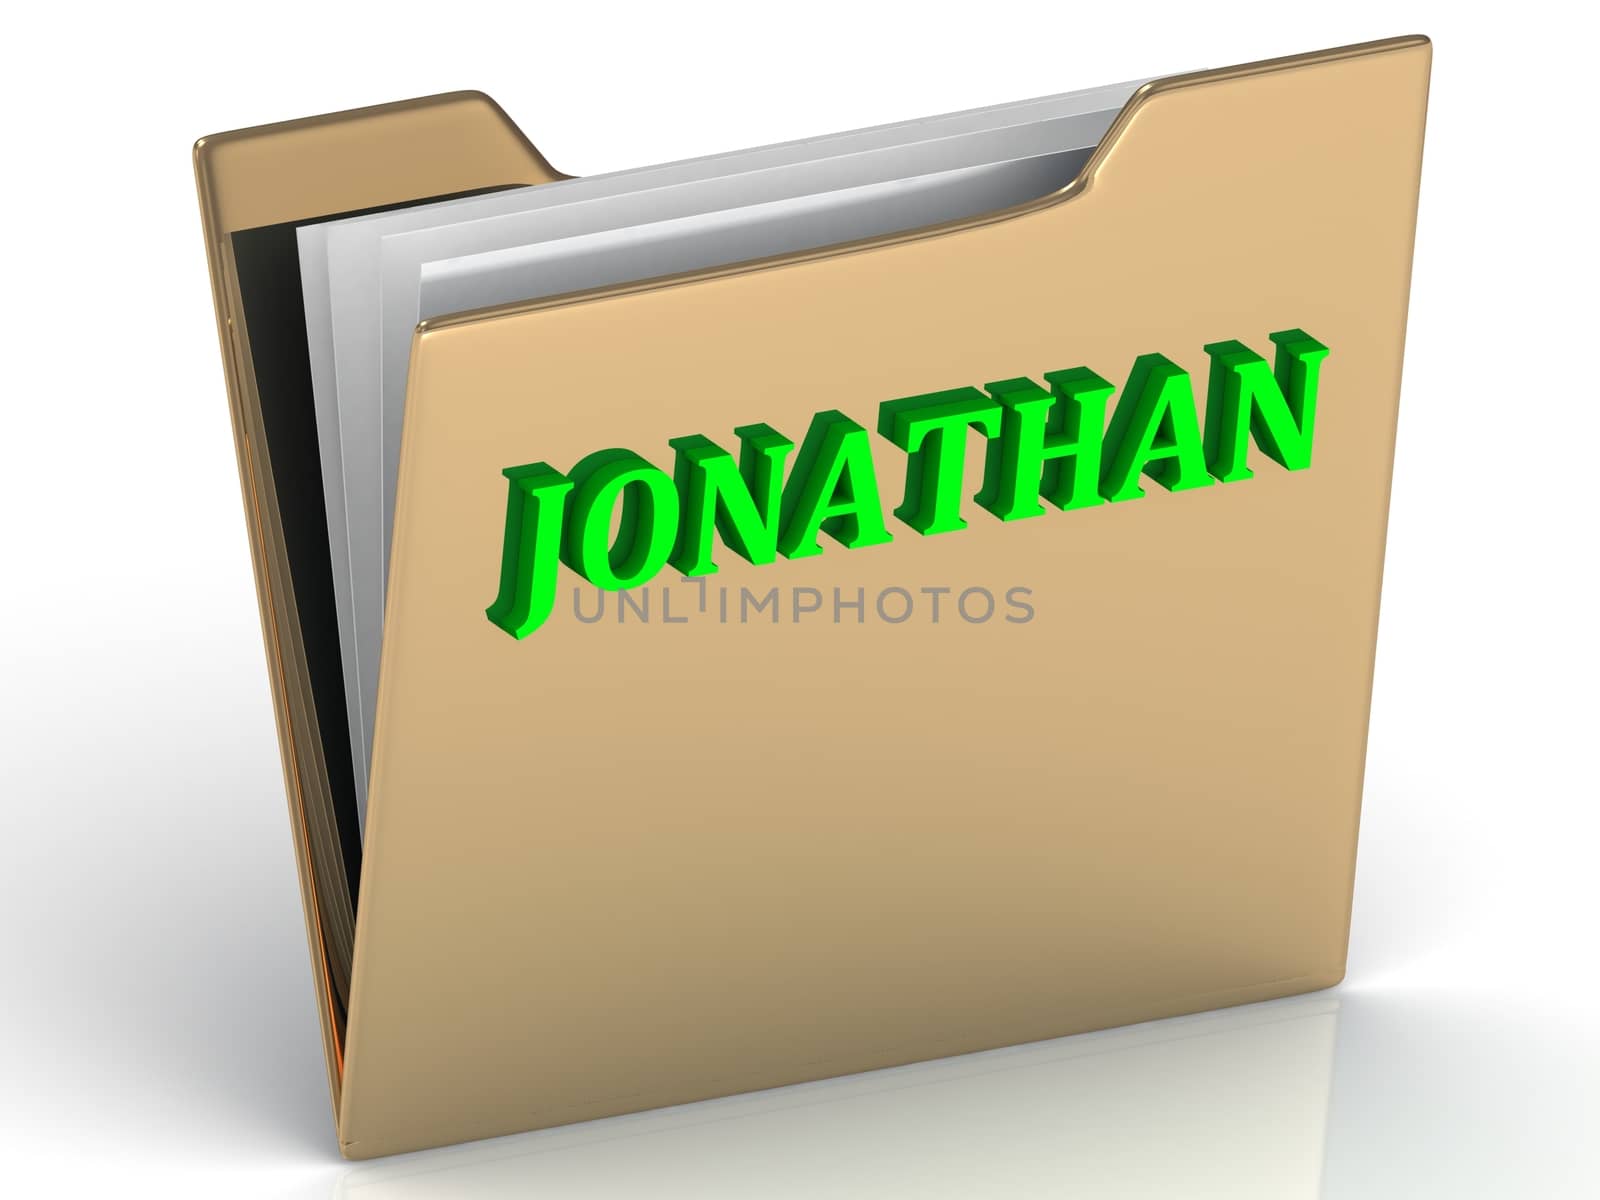 JONATHAN- bright green letters on gold paperwork folder by GreenMost